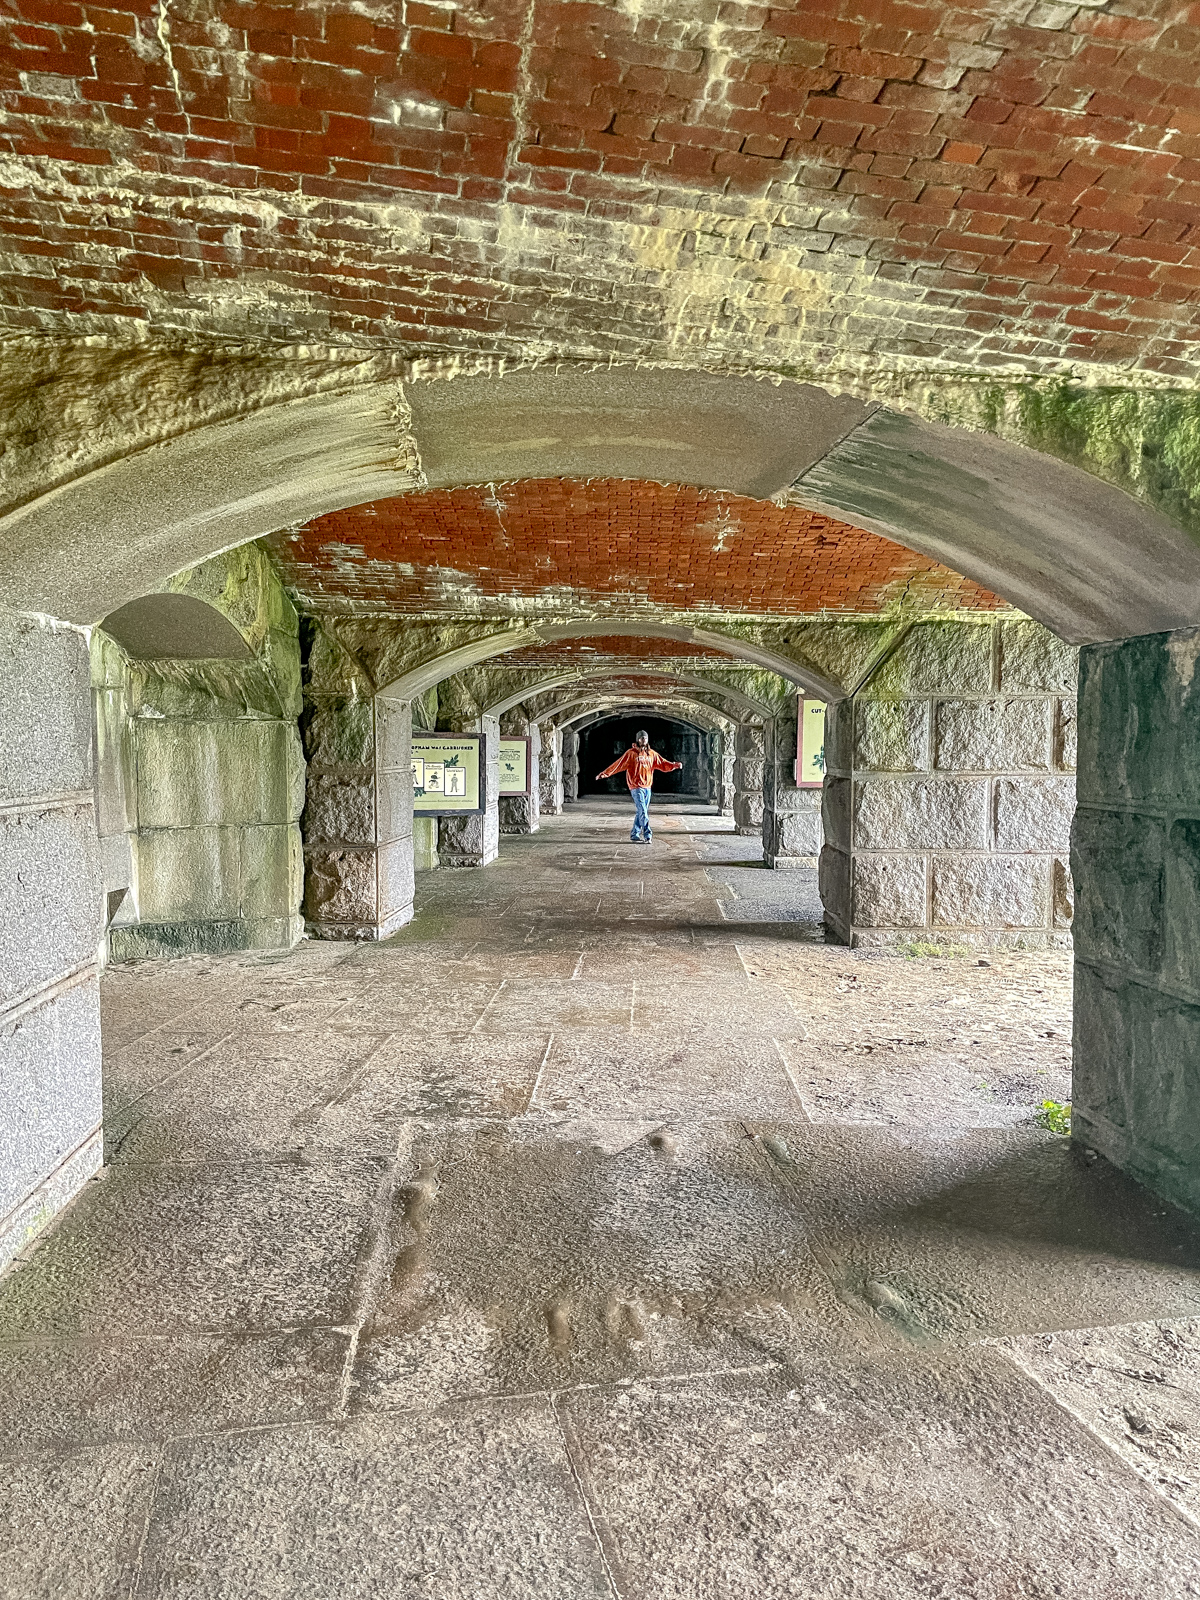 The tunnels in Fort Popham Maine